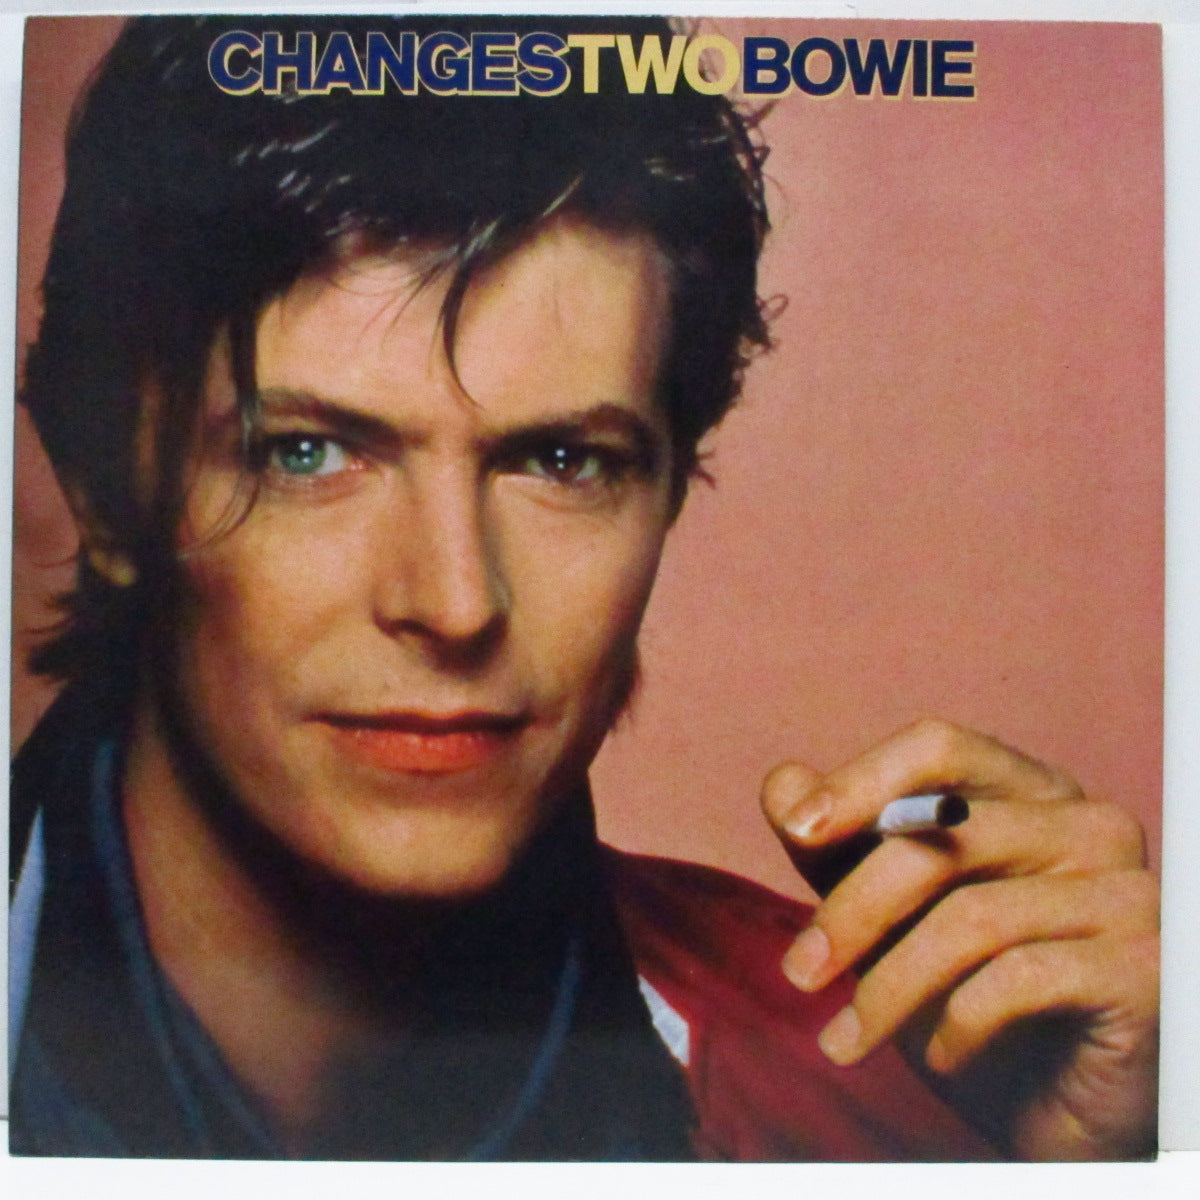 DAVID BOWIE (デヴィッド・ボウイ) - Changestwobowie (UK 